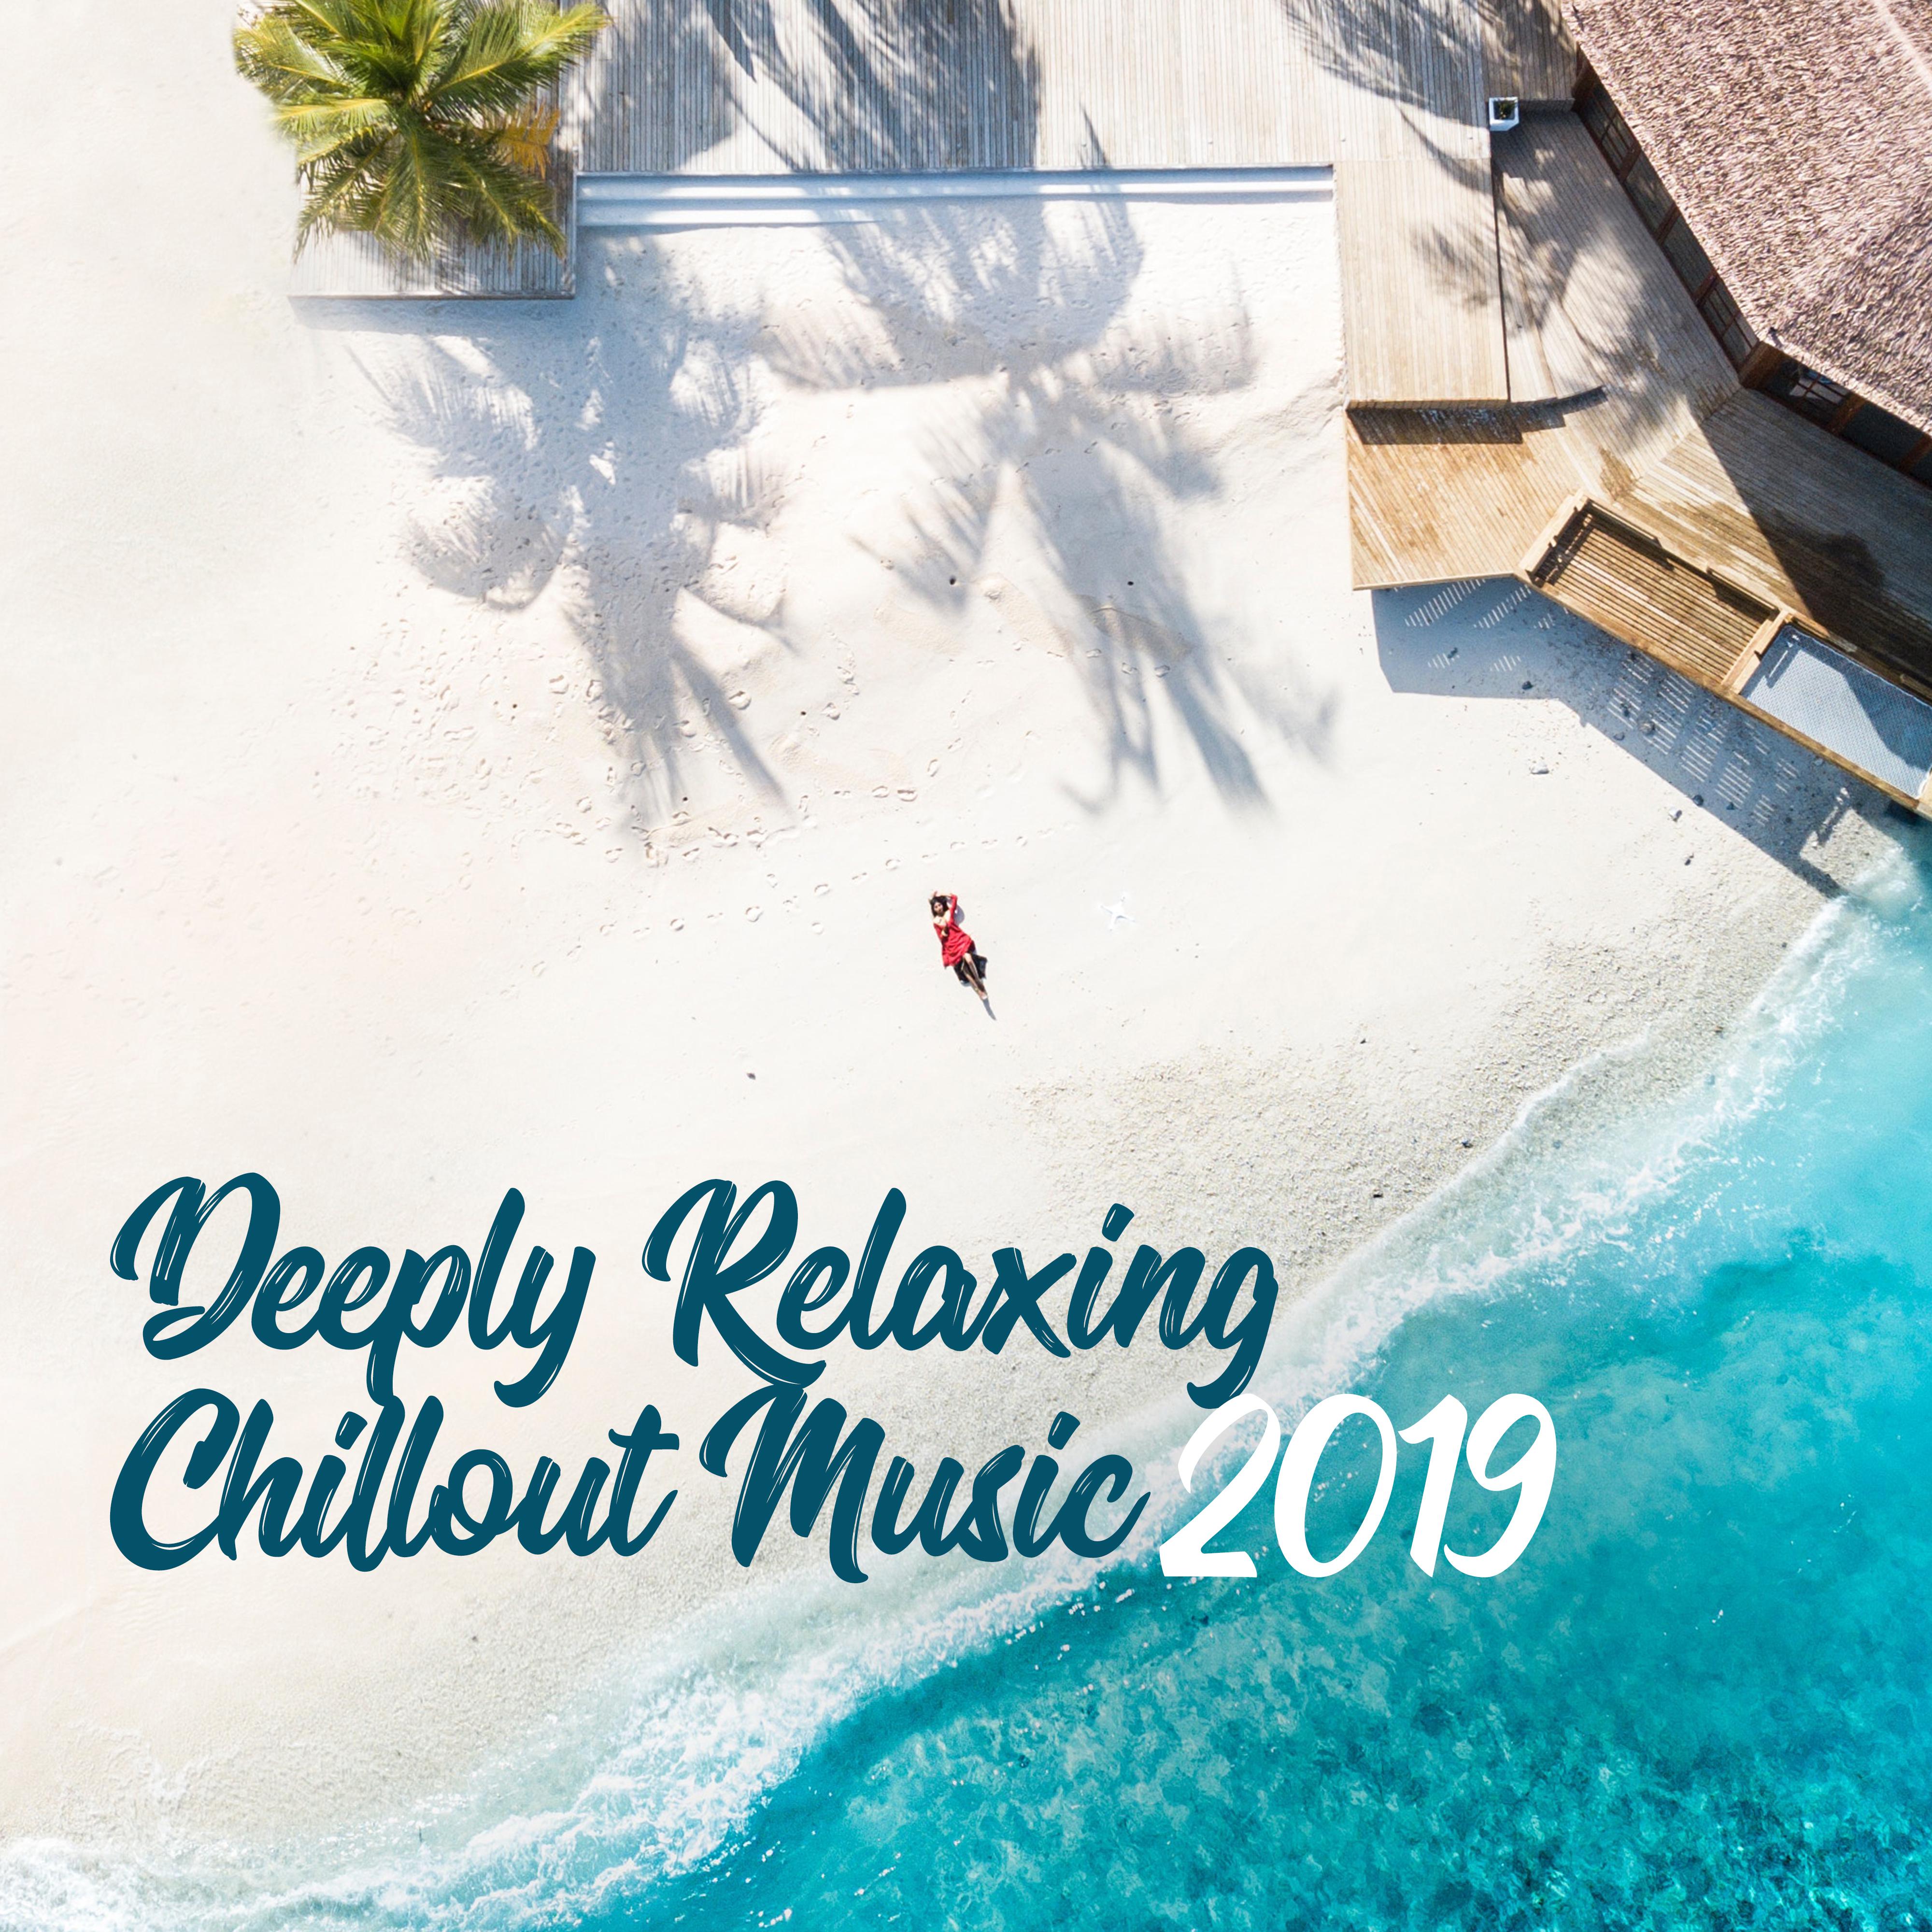 Deeply Relaxing Chillout Music 2019